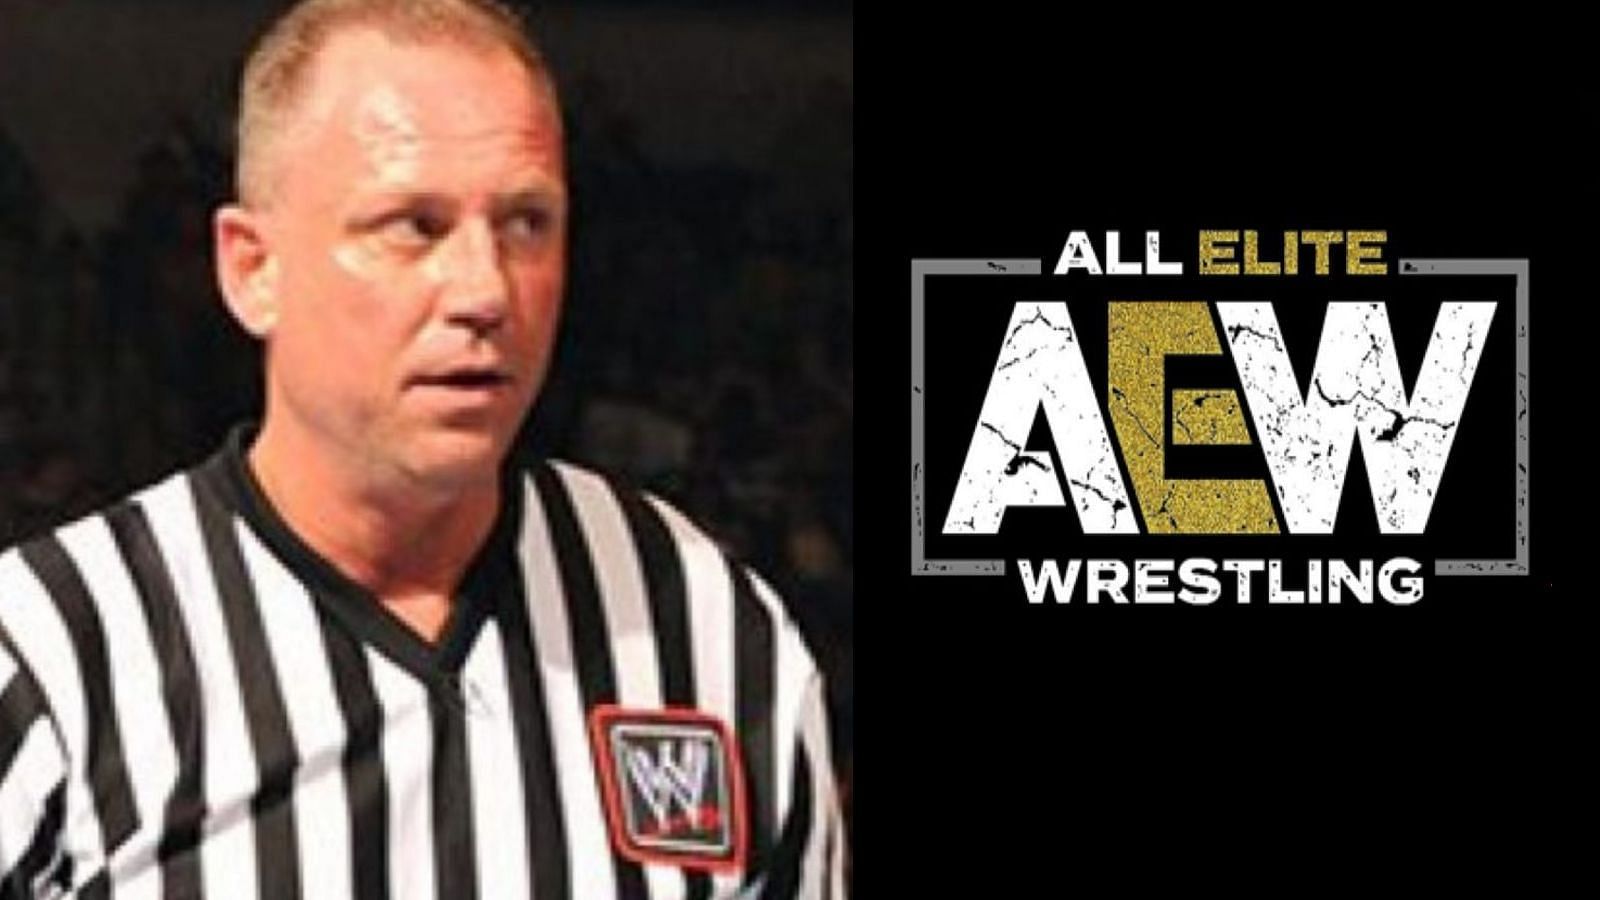 What has AEW been dropping the ball with, according to Chioda?